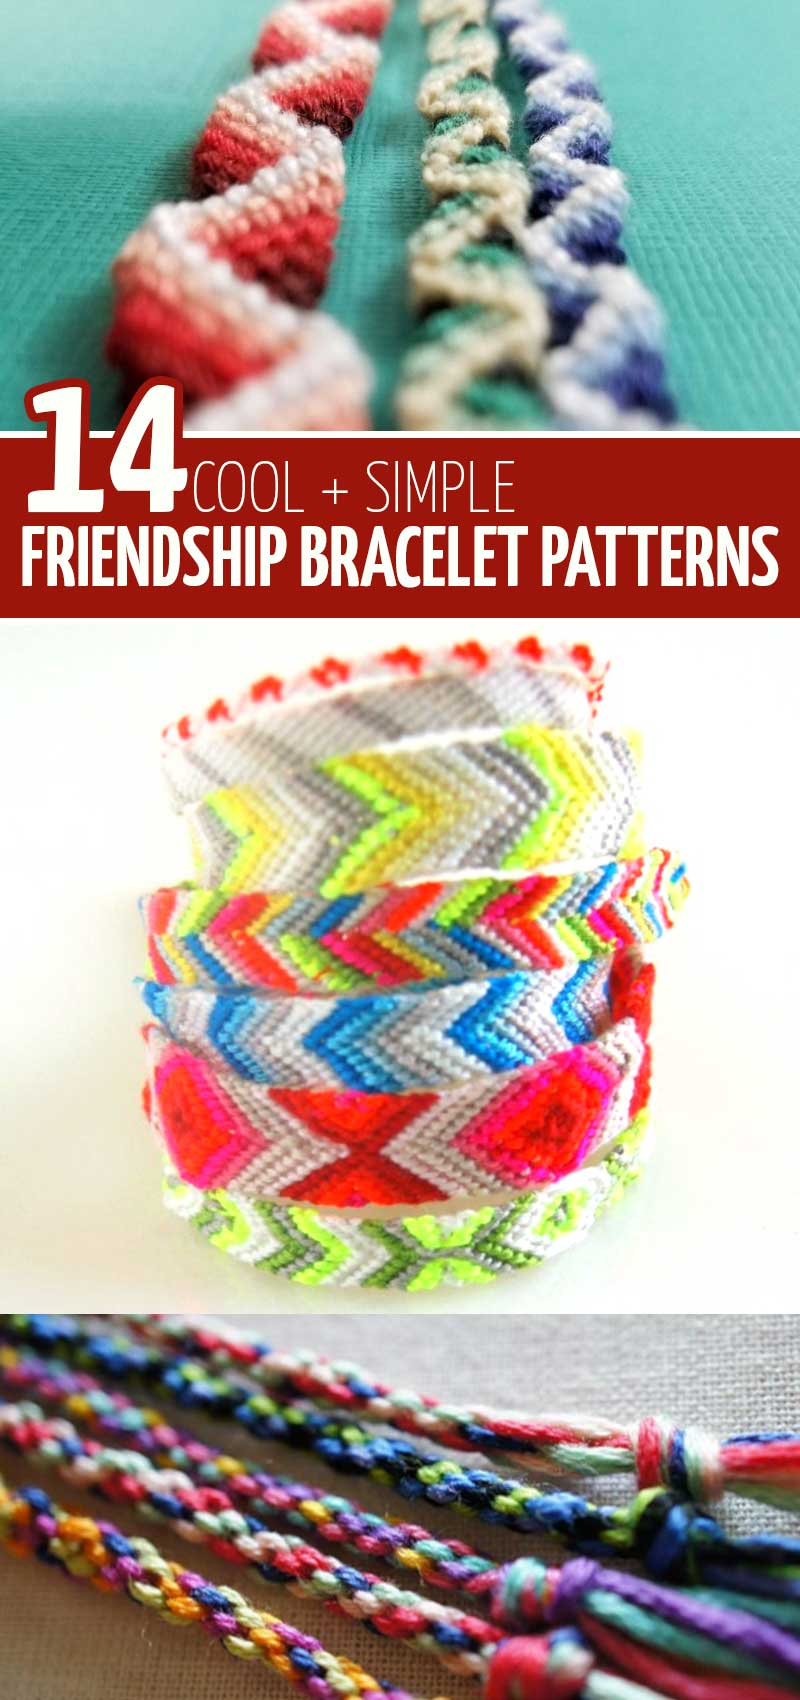 Embroidery Floss Bracelets Patterns Diy Friendship Bracelet Tutorials And Patterns Moms And Crafters